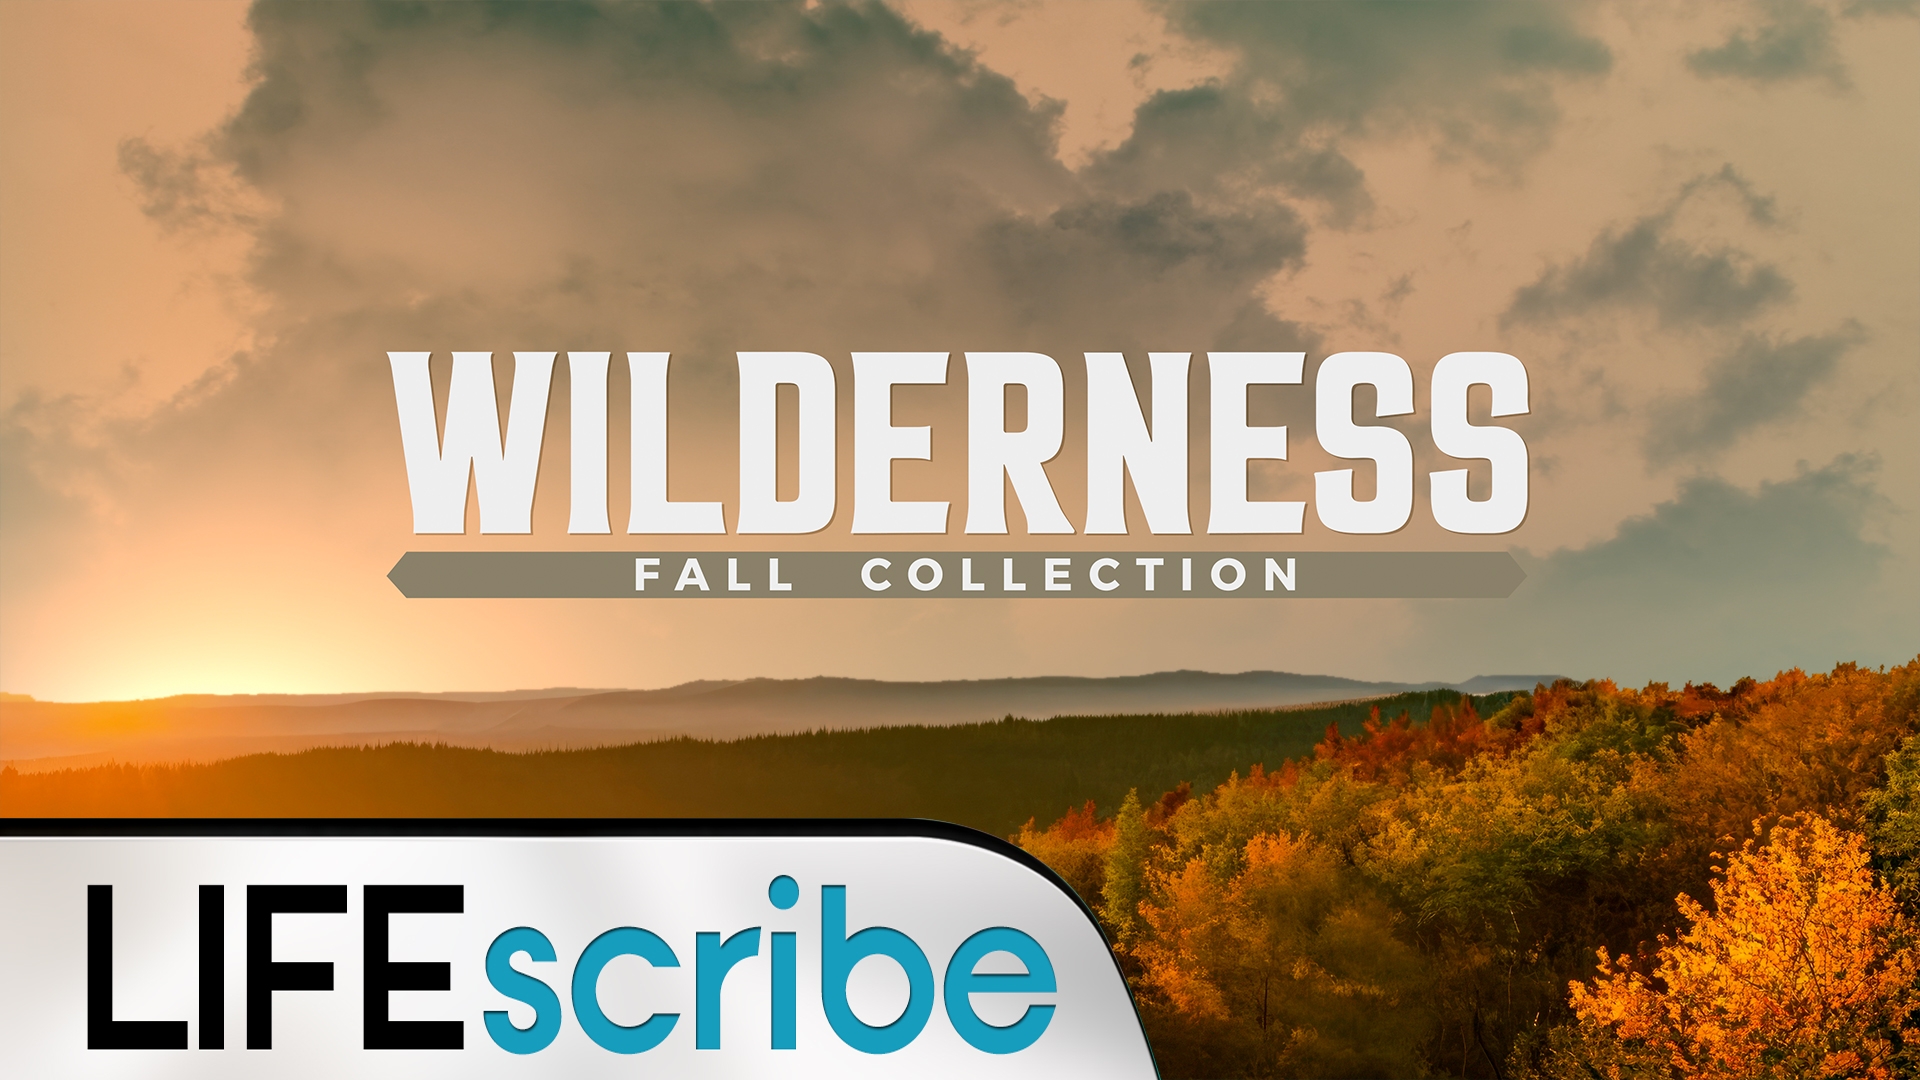 Wilderness Fall Collection